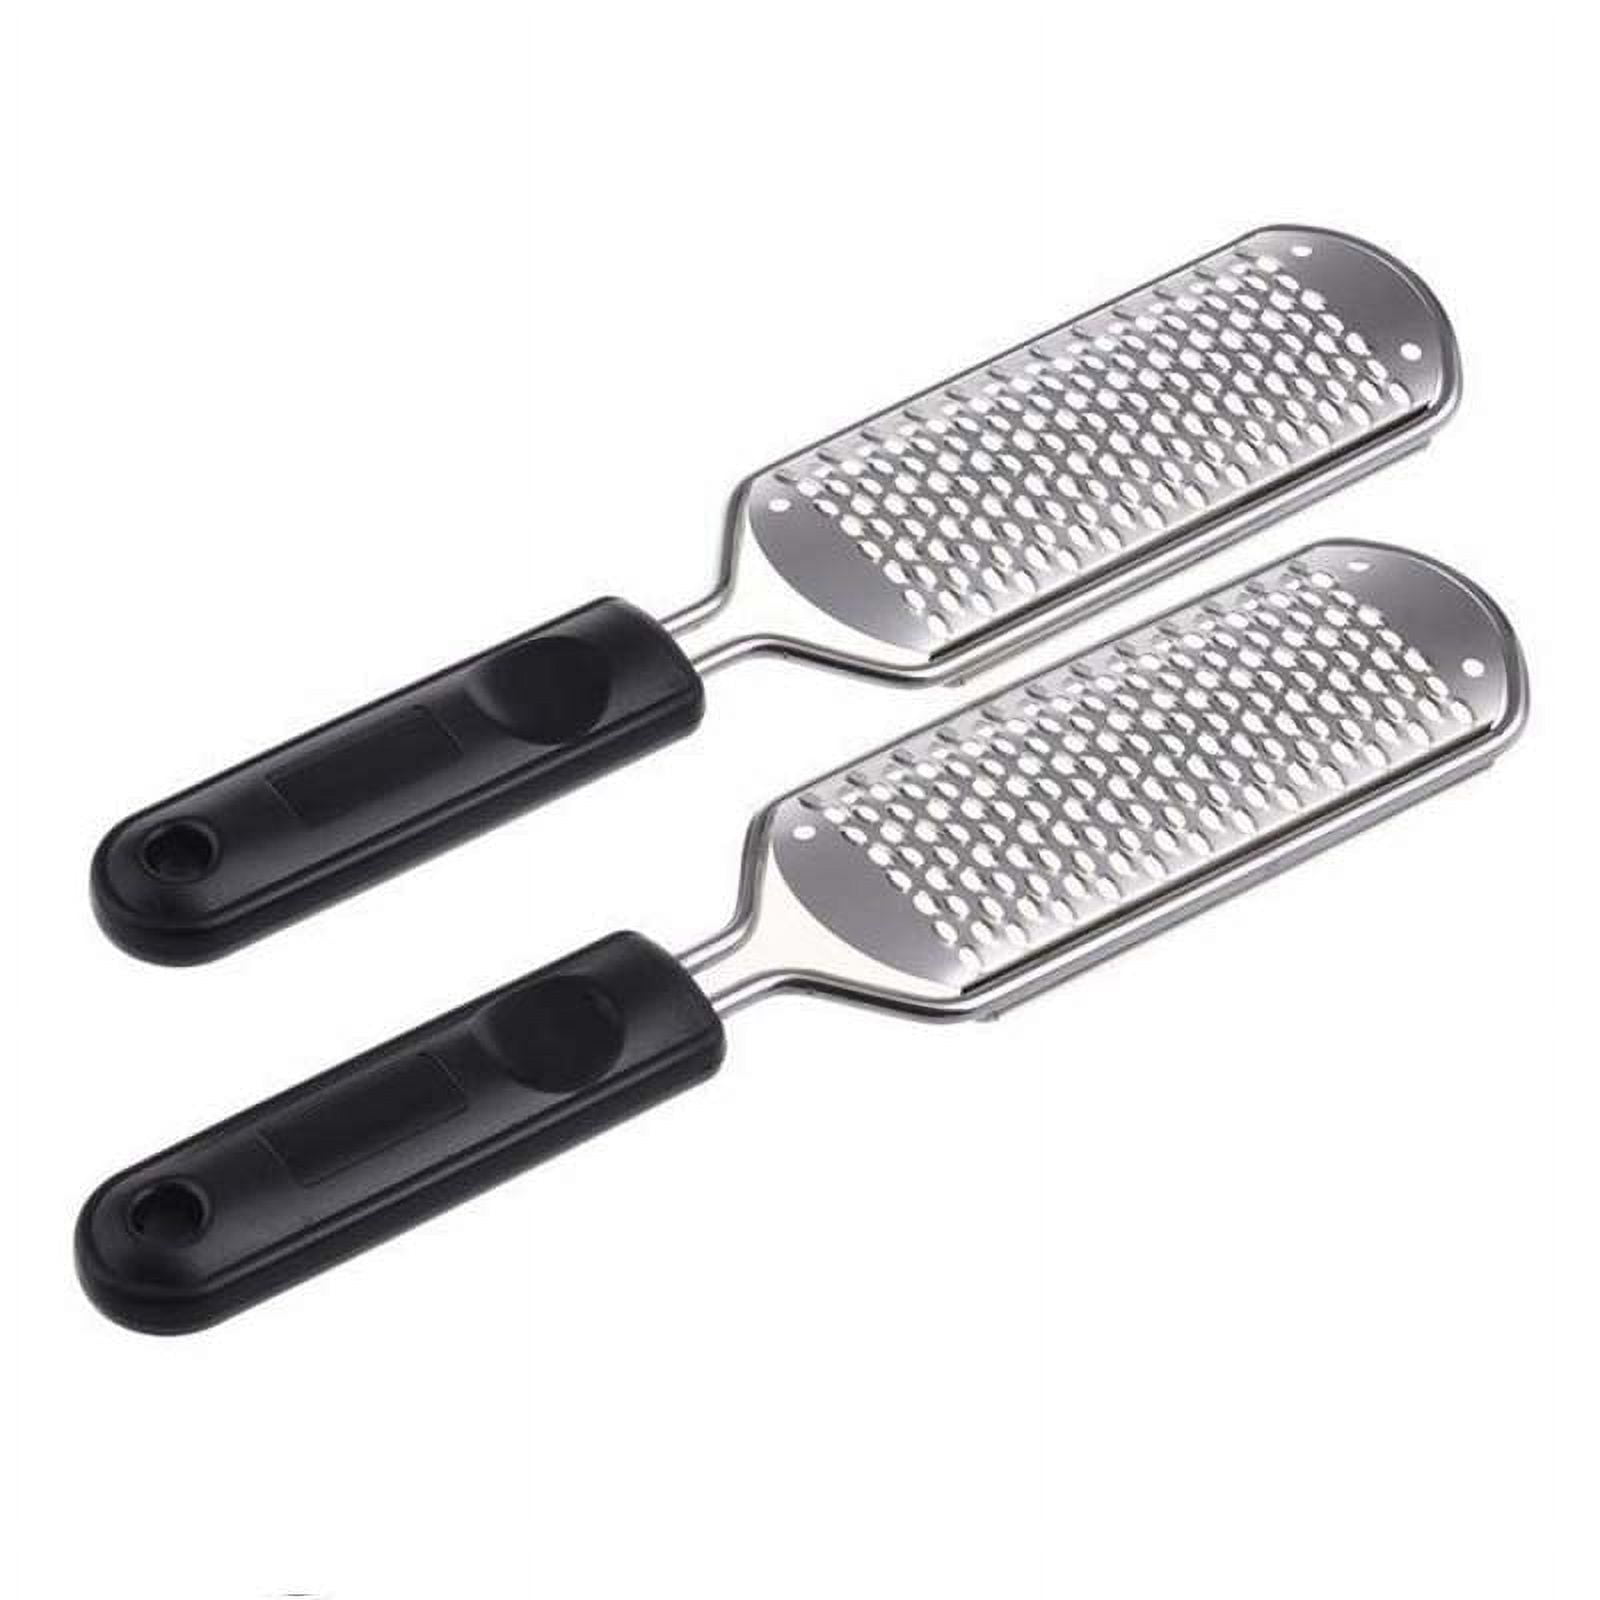 Foot Rasp Foot File Foot Grater Can be Used on Both Wet and Dry